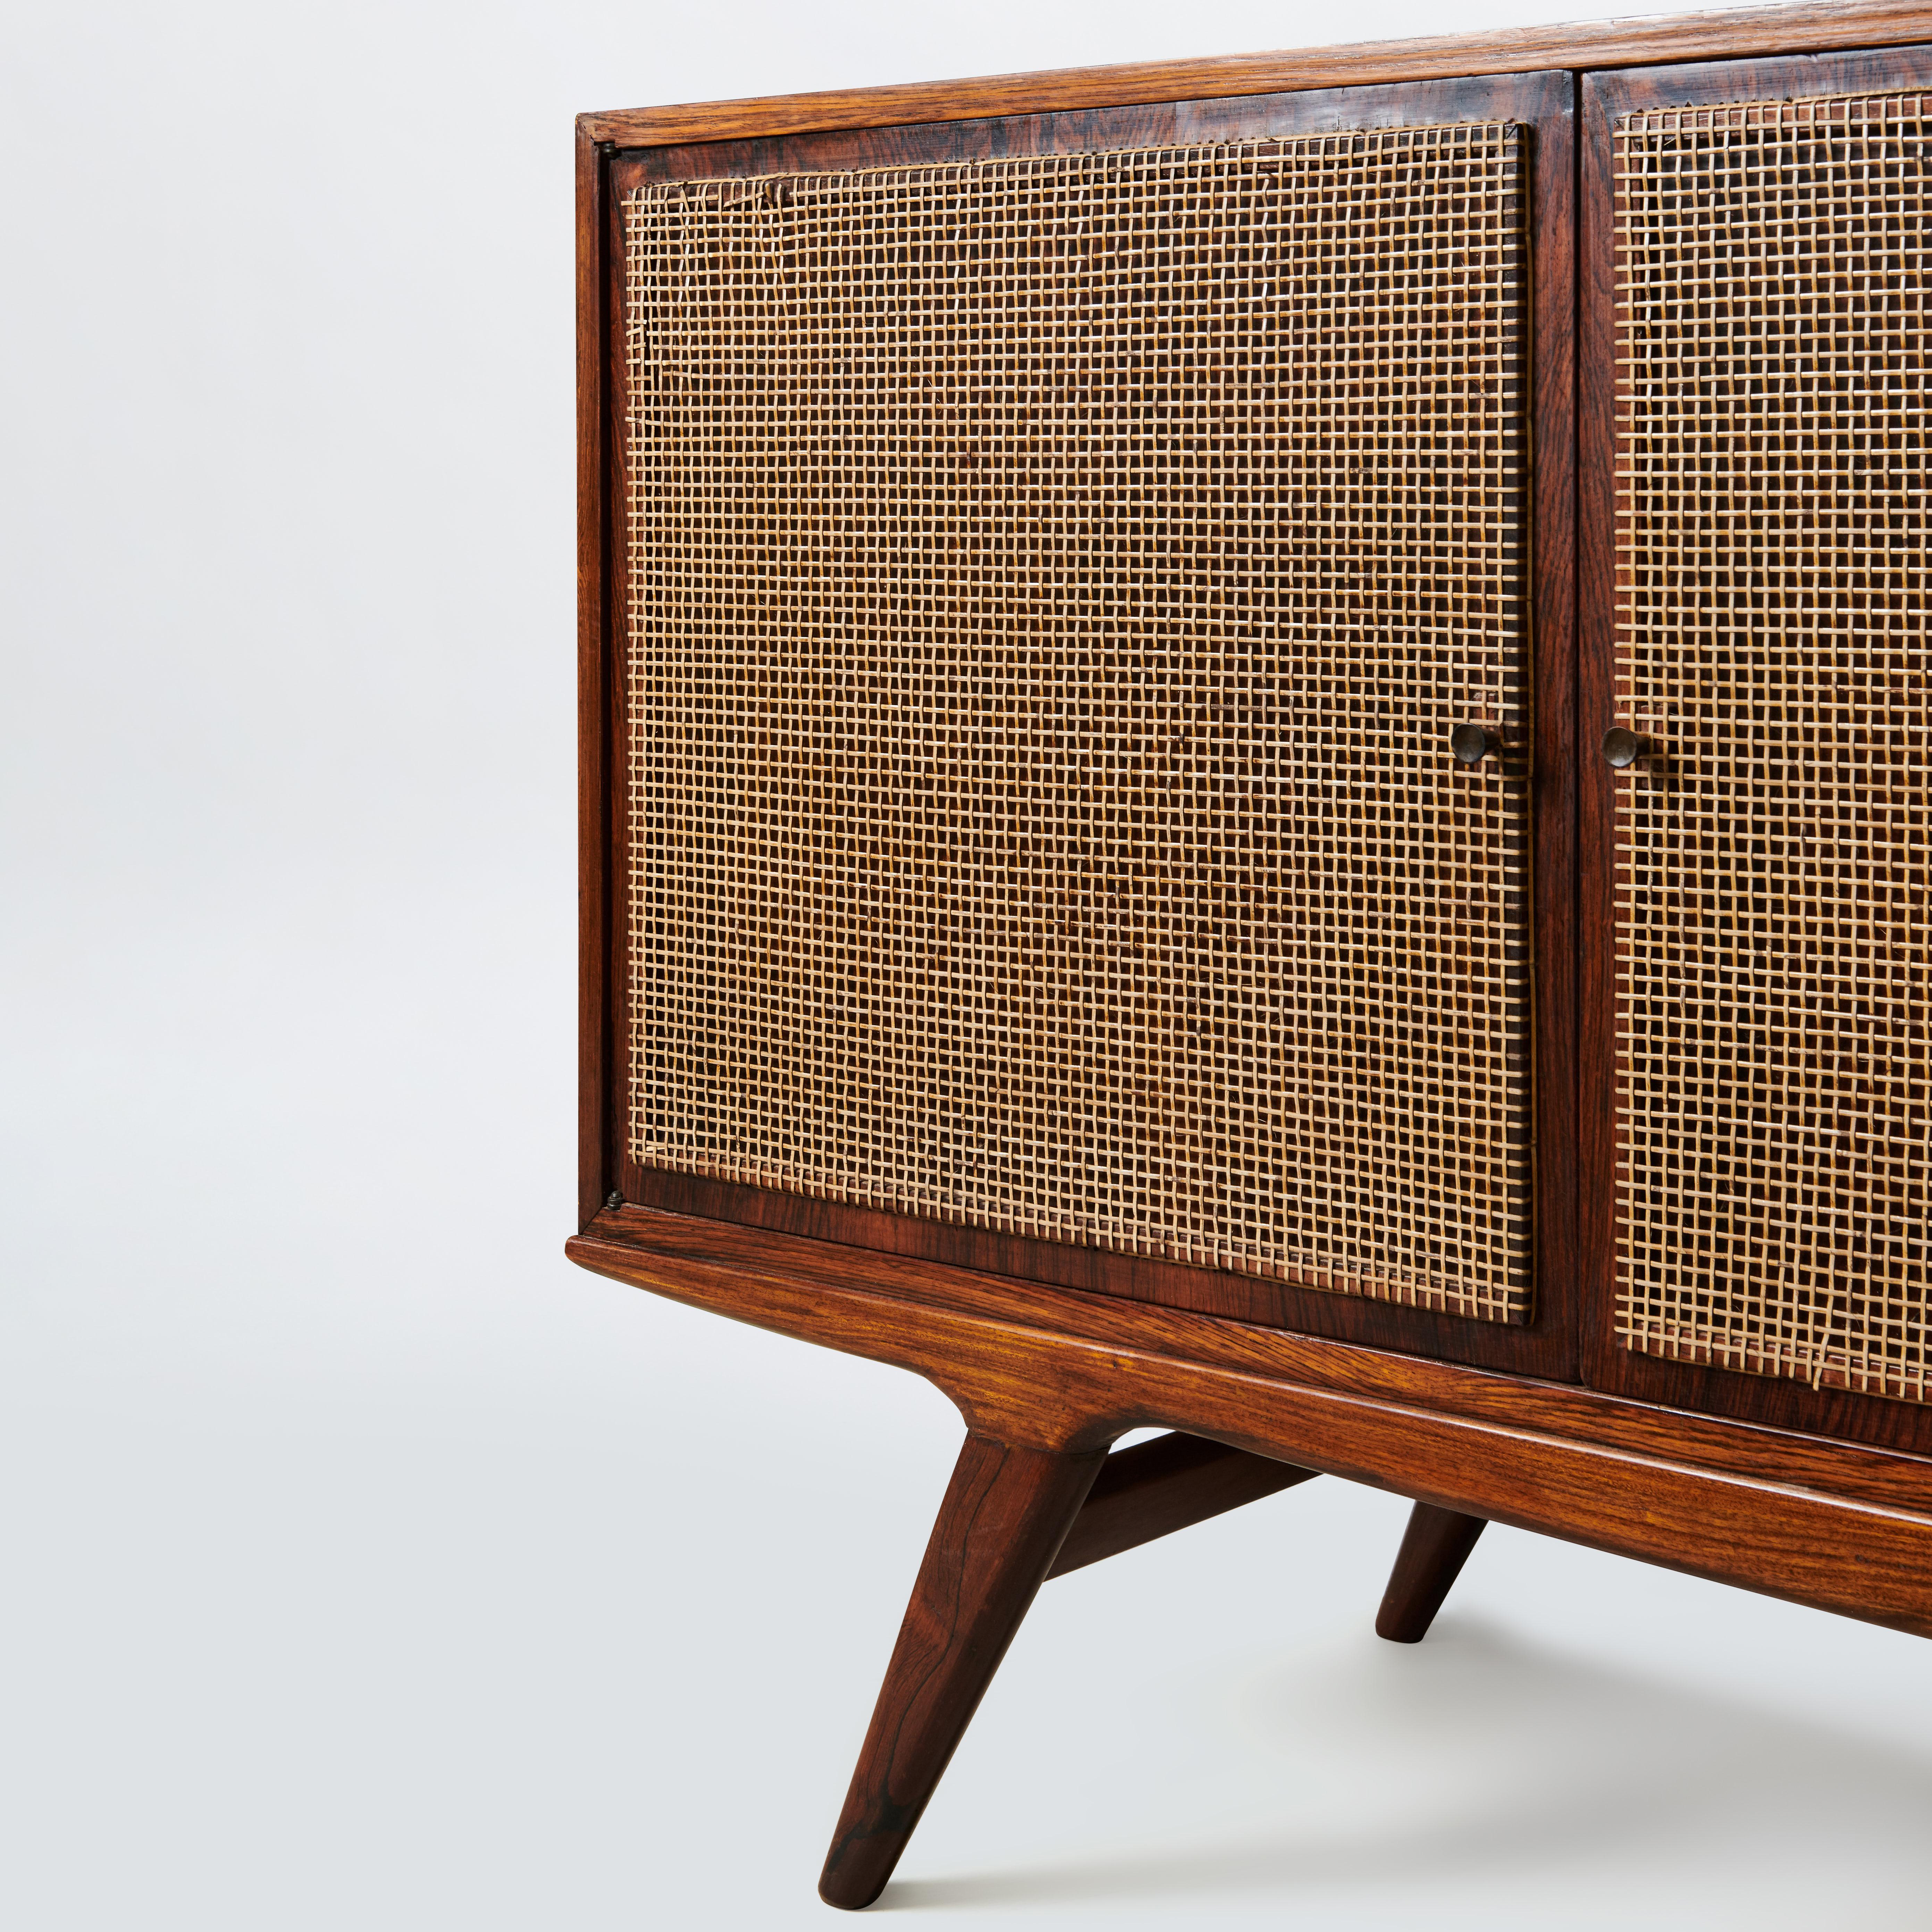 Carlo Hauner & Martin Eisler
Caviuna and Cane Sideboard with metal details
Manufactured by Forma
Brazil, 1950s.
  